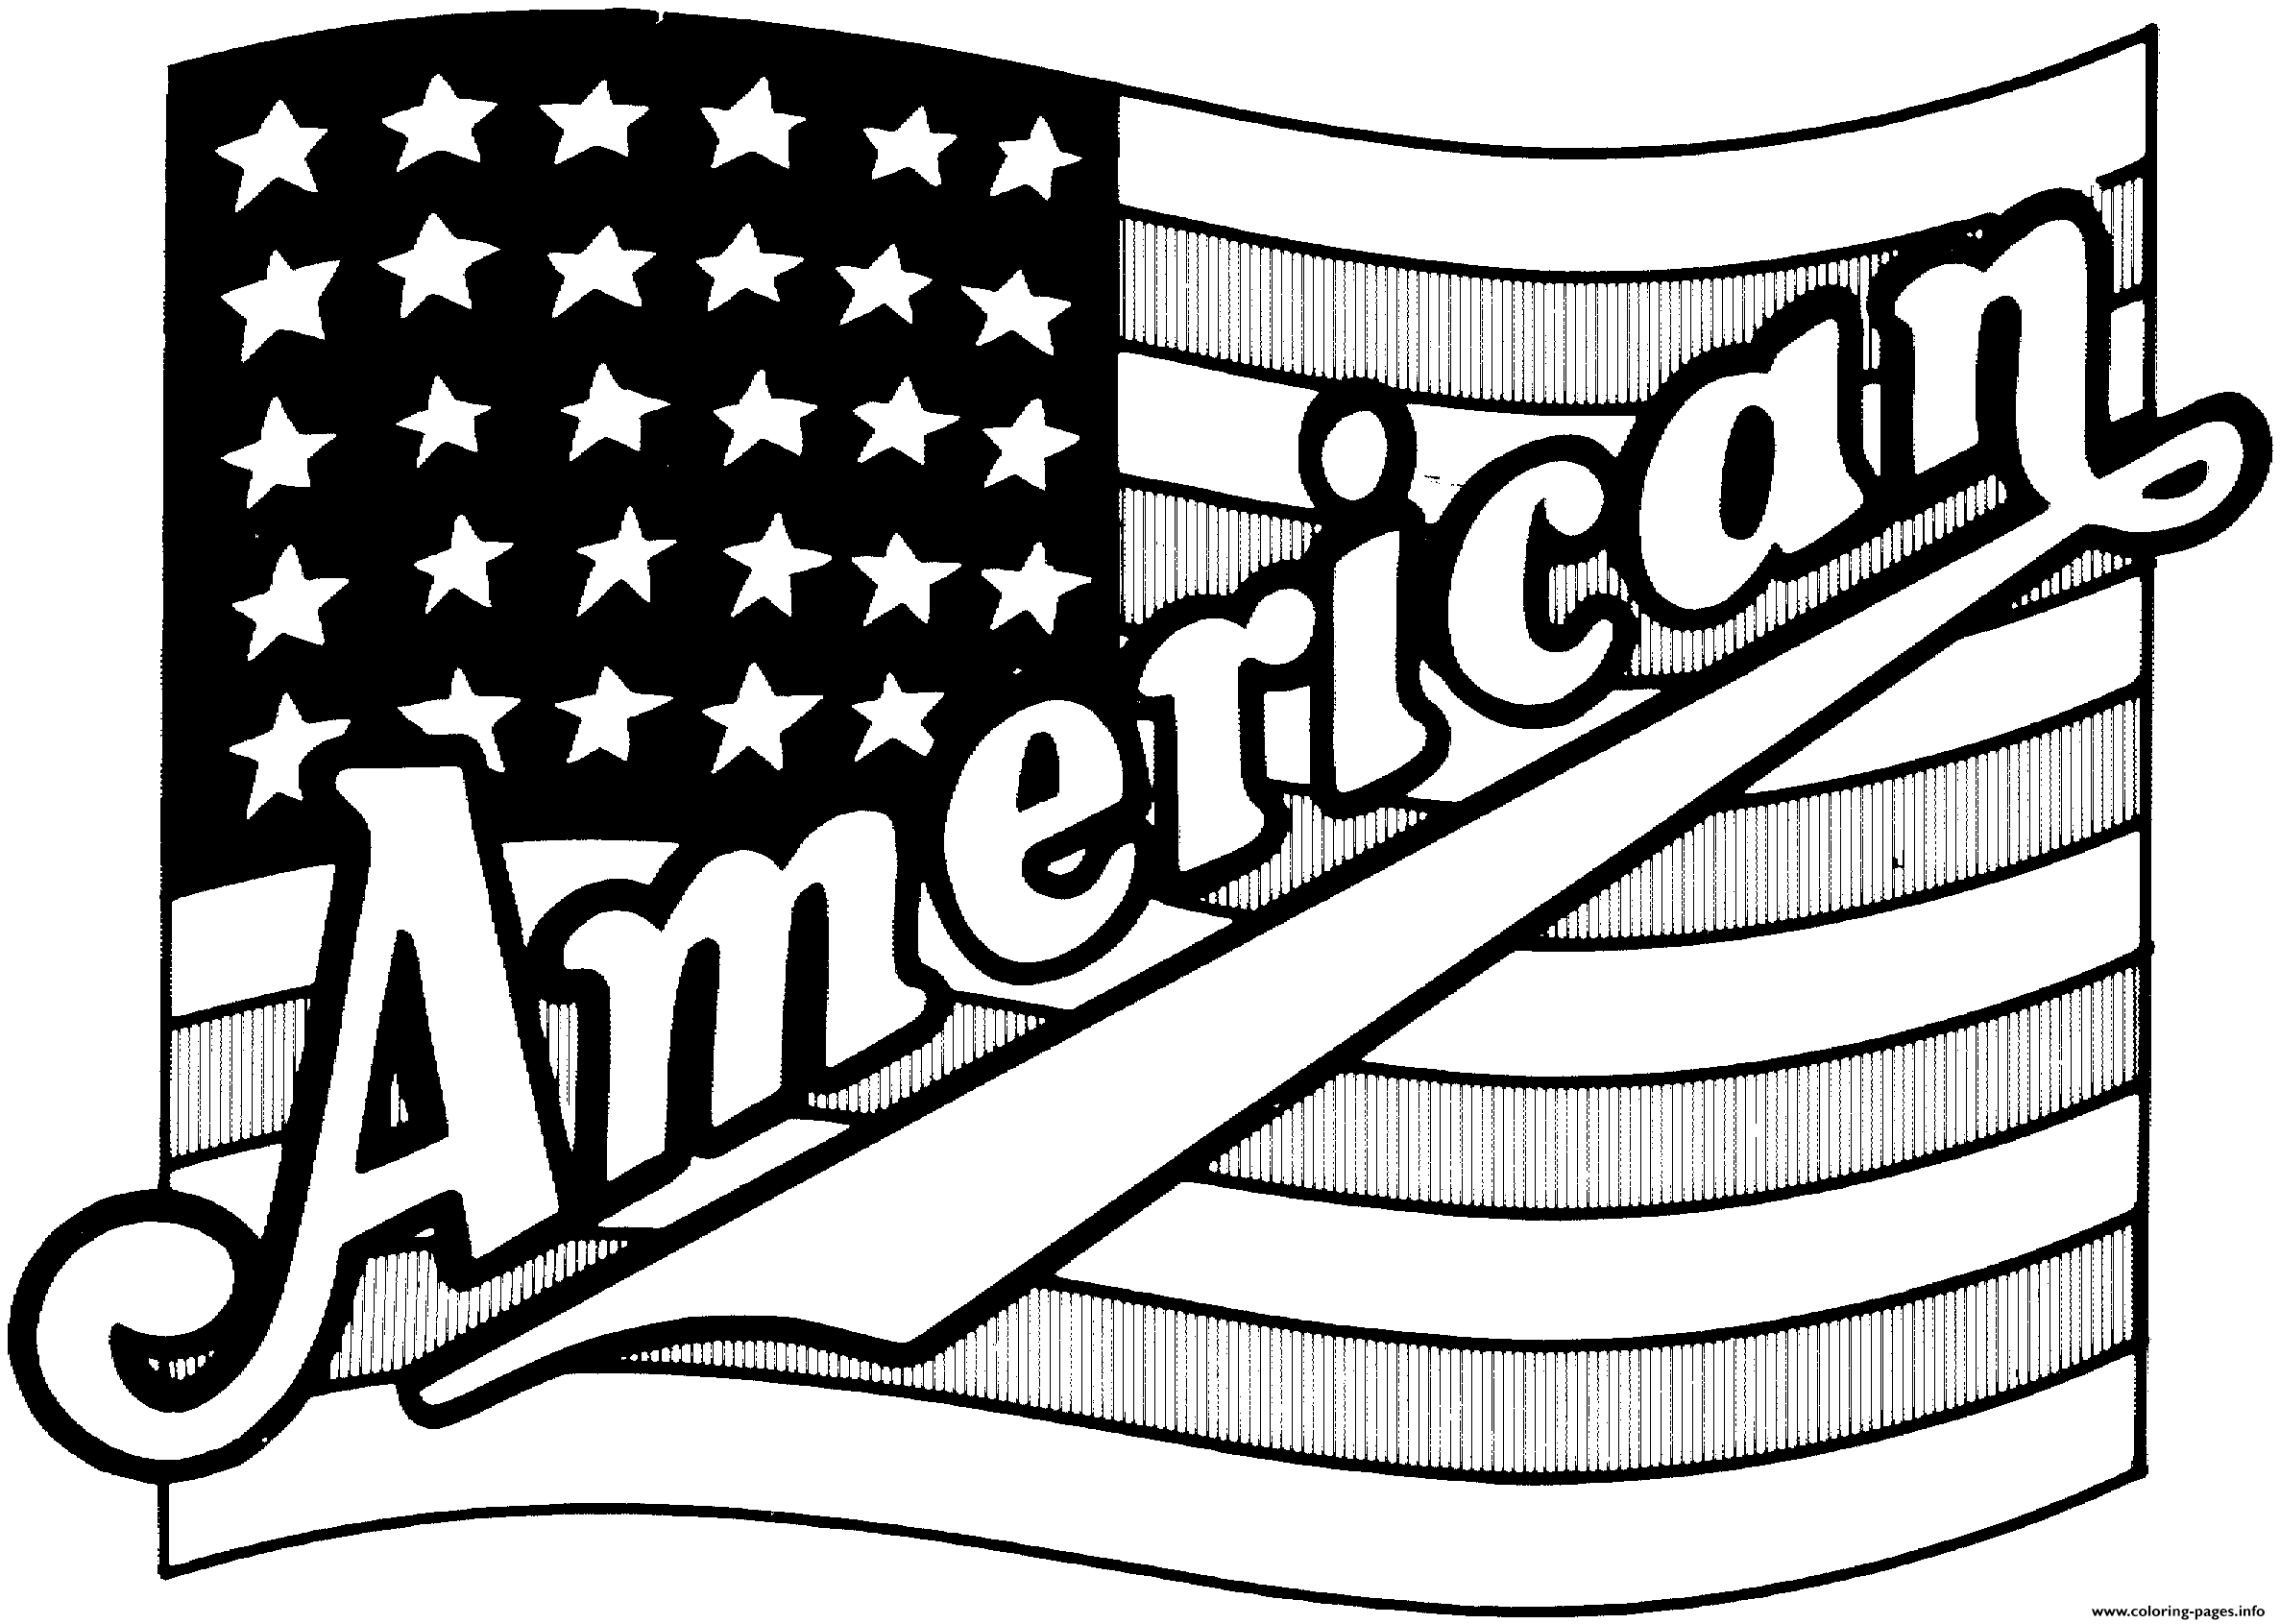 832 Simple Patriotic Coloring Pages To Print with Animal character